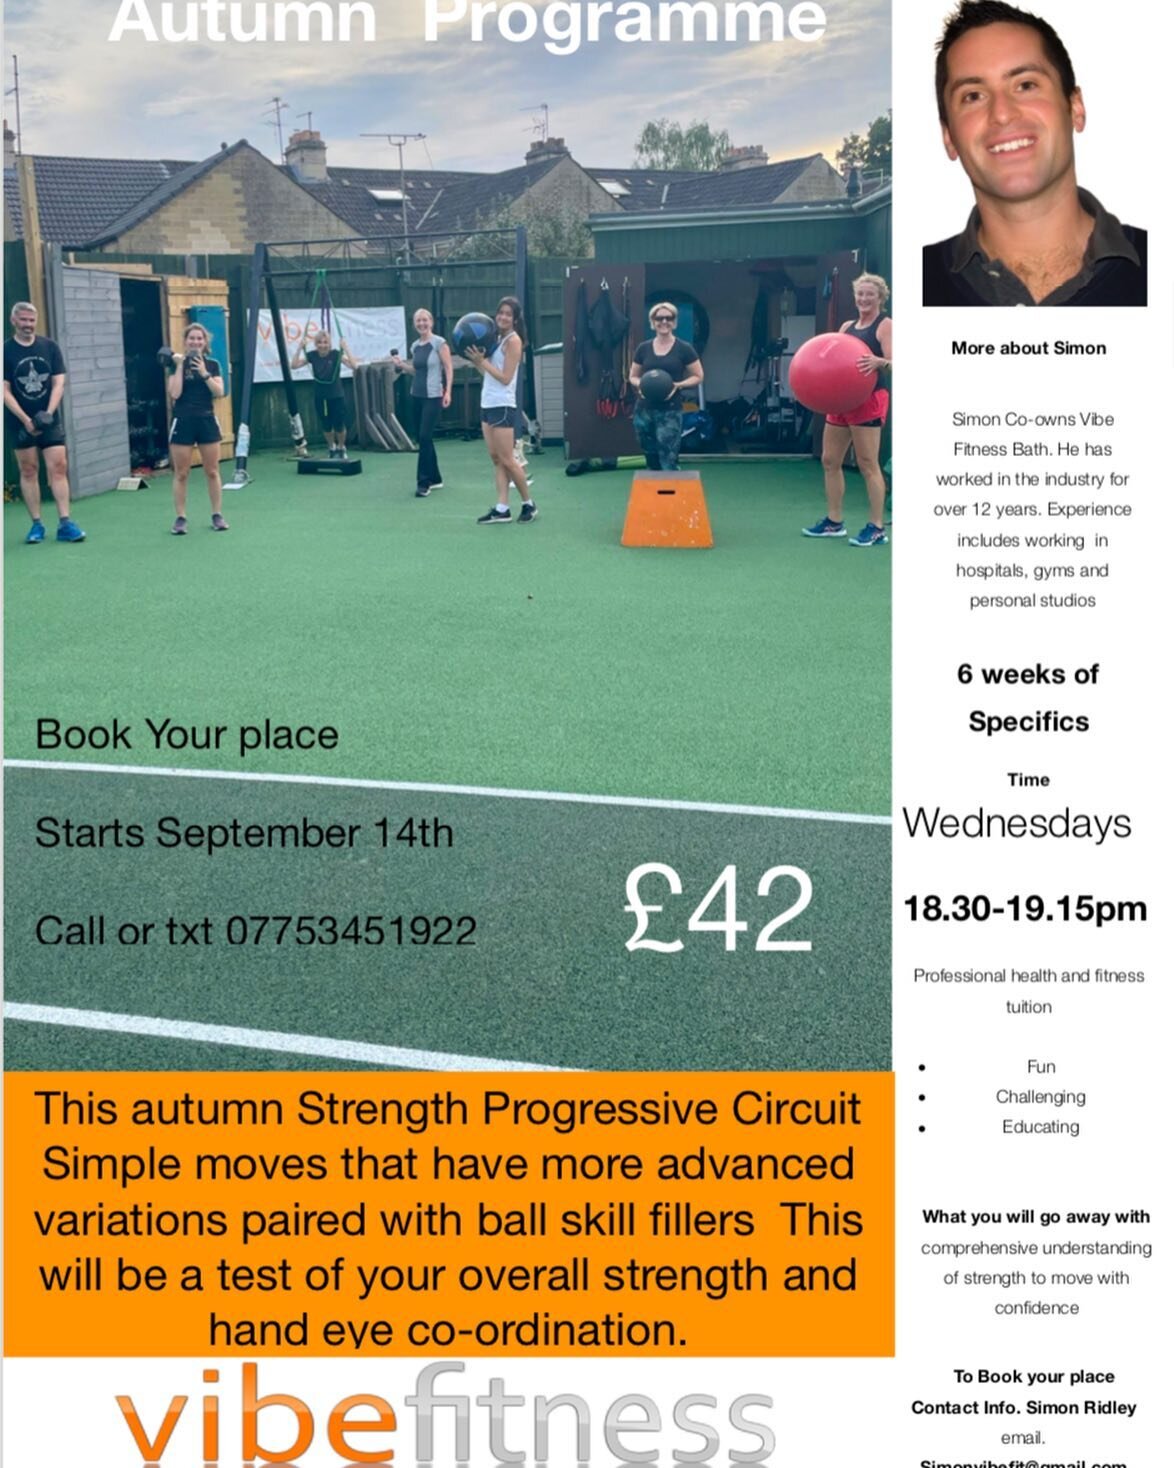 Outdoor Fitness course starting 14th September. If you are Looking to improve your overall strength and stay active. I believe I&rsquo;ve set up a unique space in a friendly community club  Bath Tennis Club with lots of kit at our disposal for great 